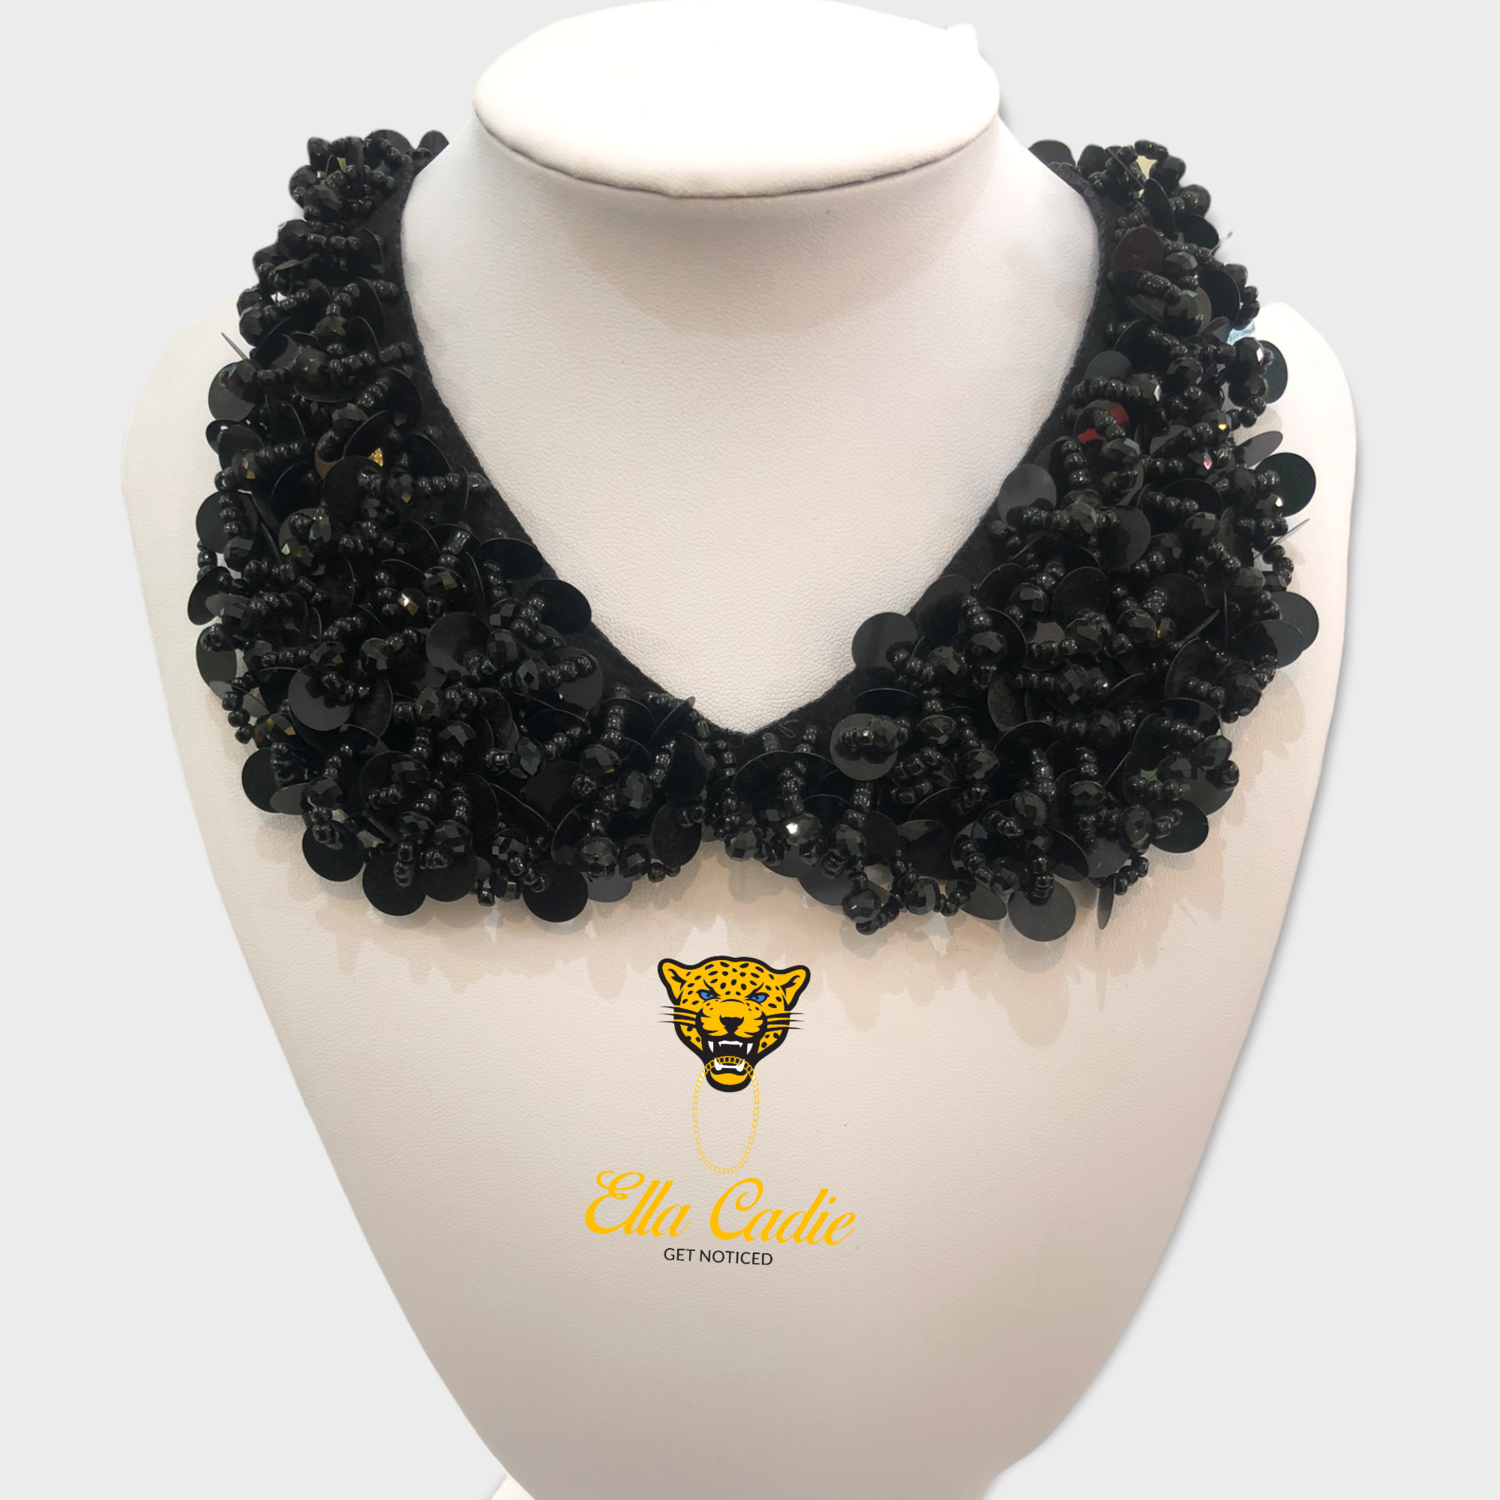 Authentic Beads Necklace